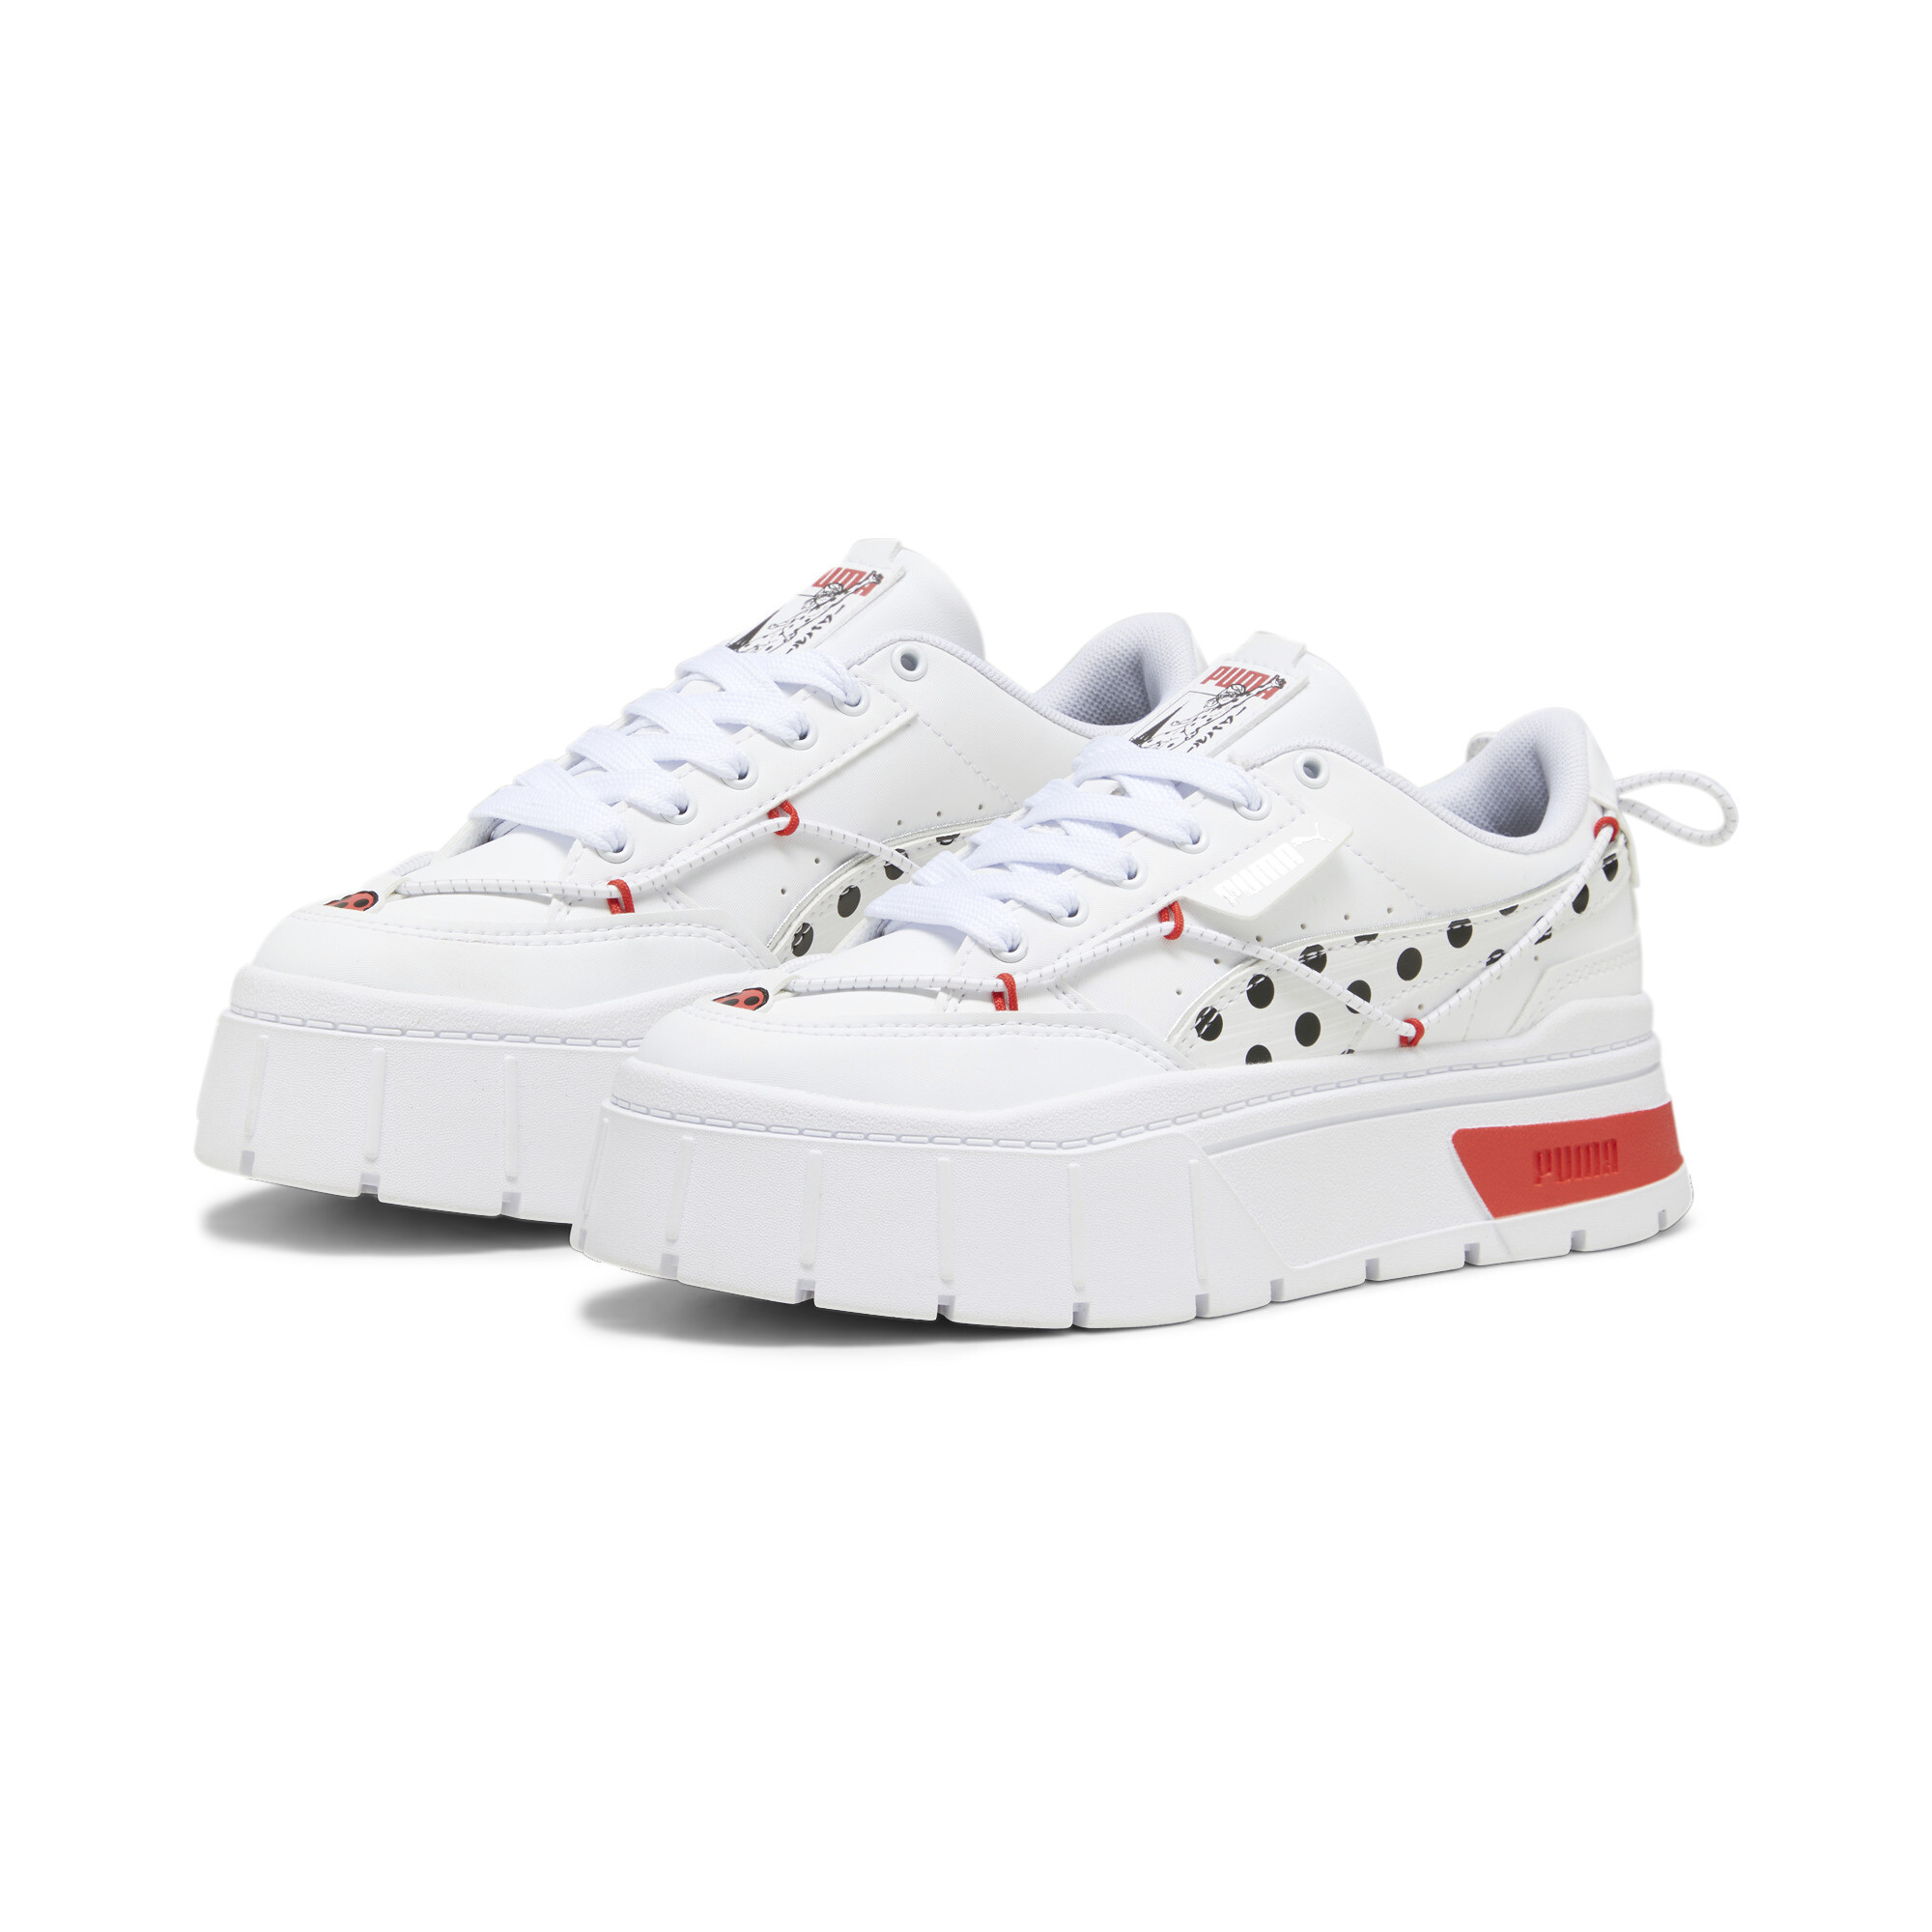 PUMA X MIRACULOUS Mayze Stack Youth Sneakers In White, Size EU 35.5